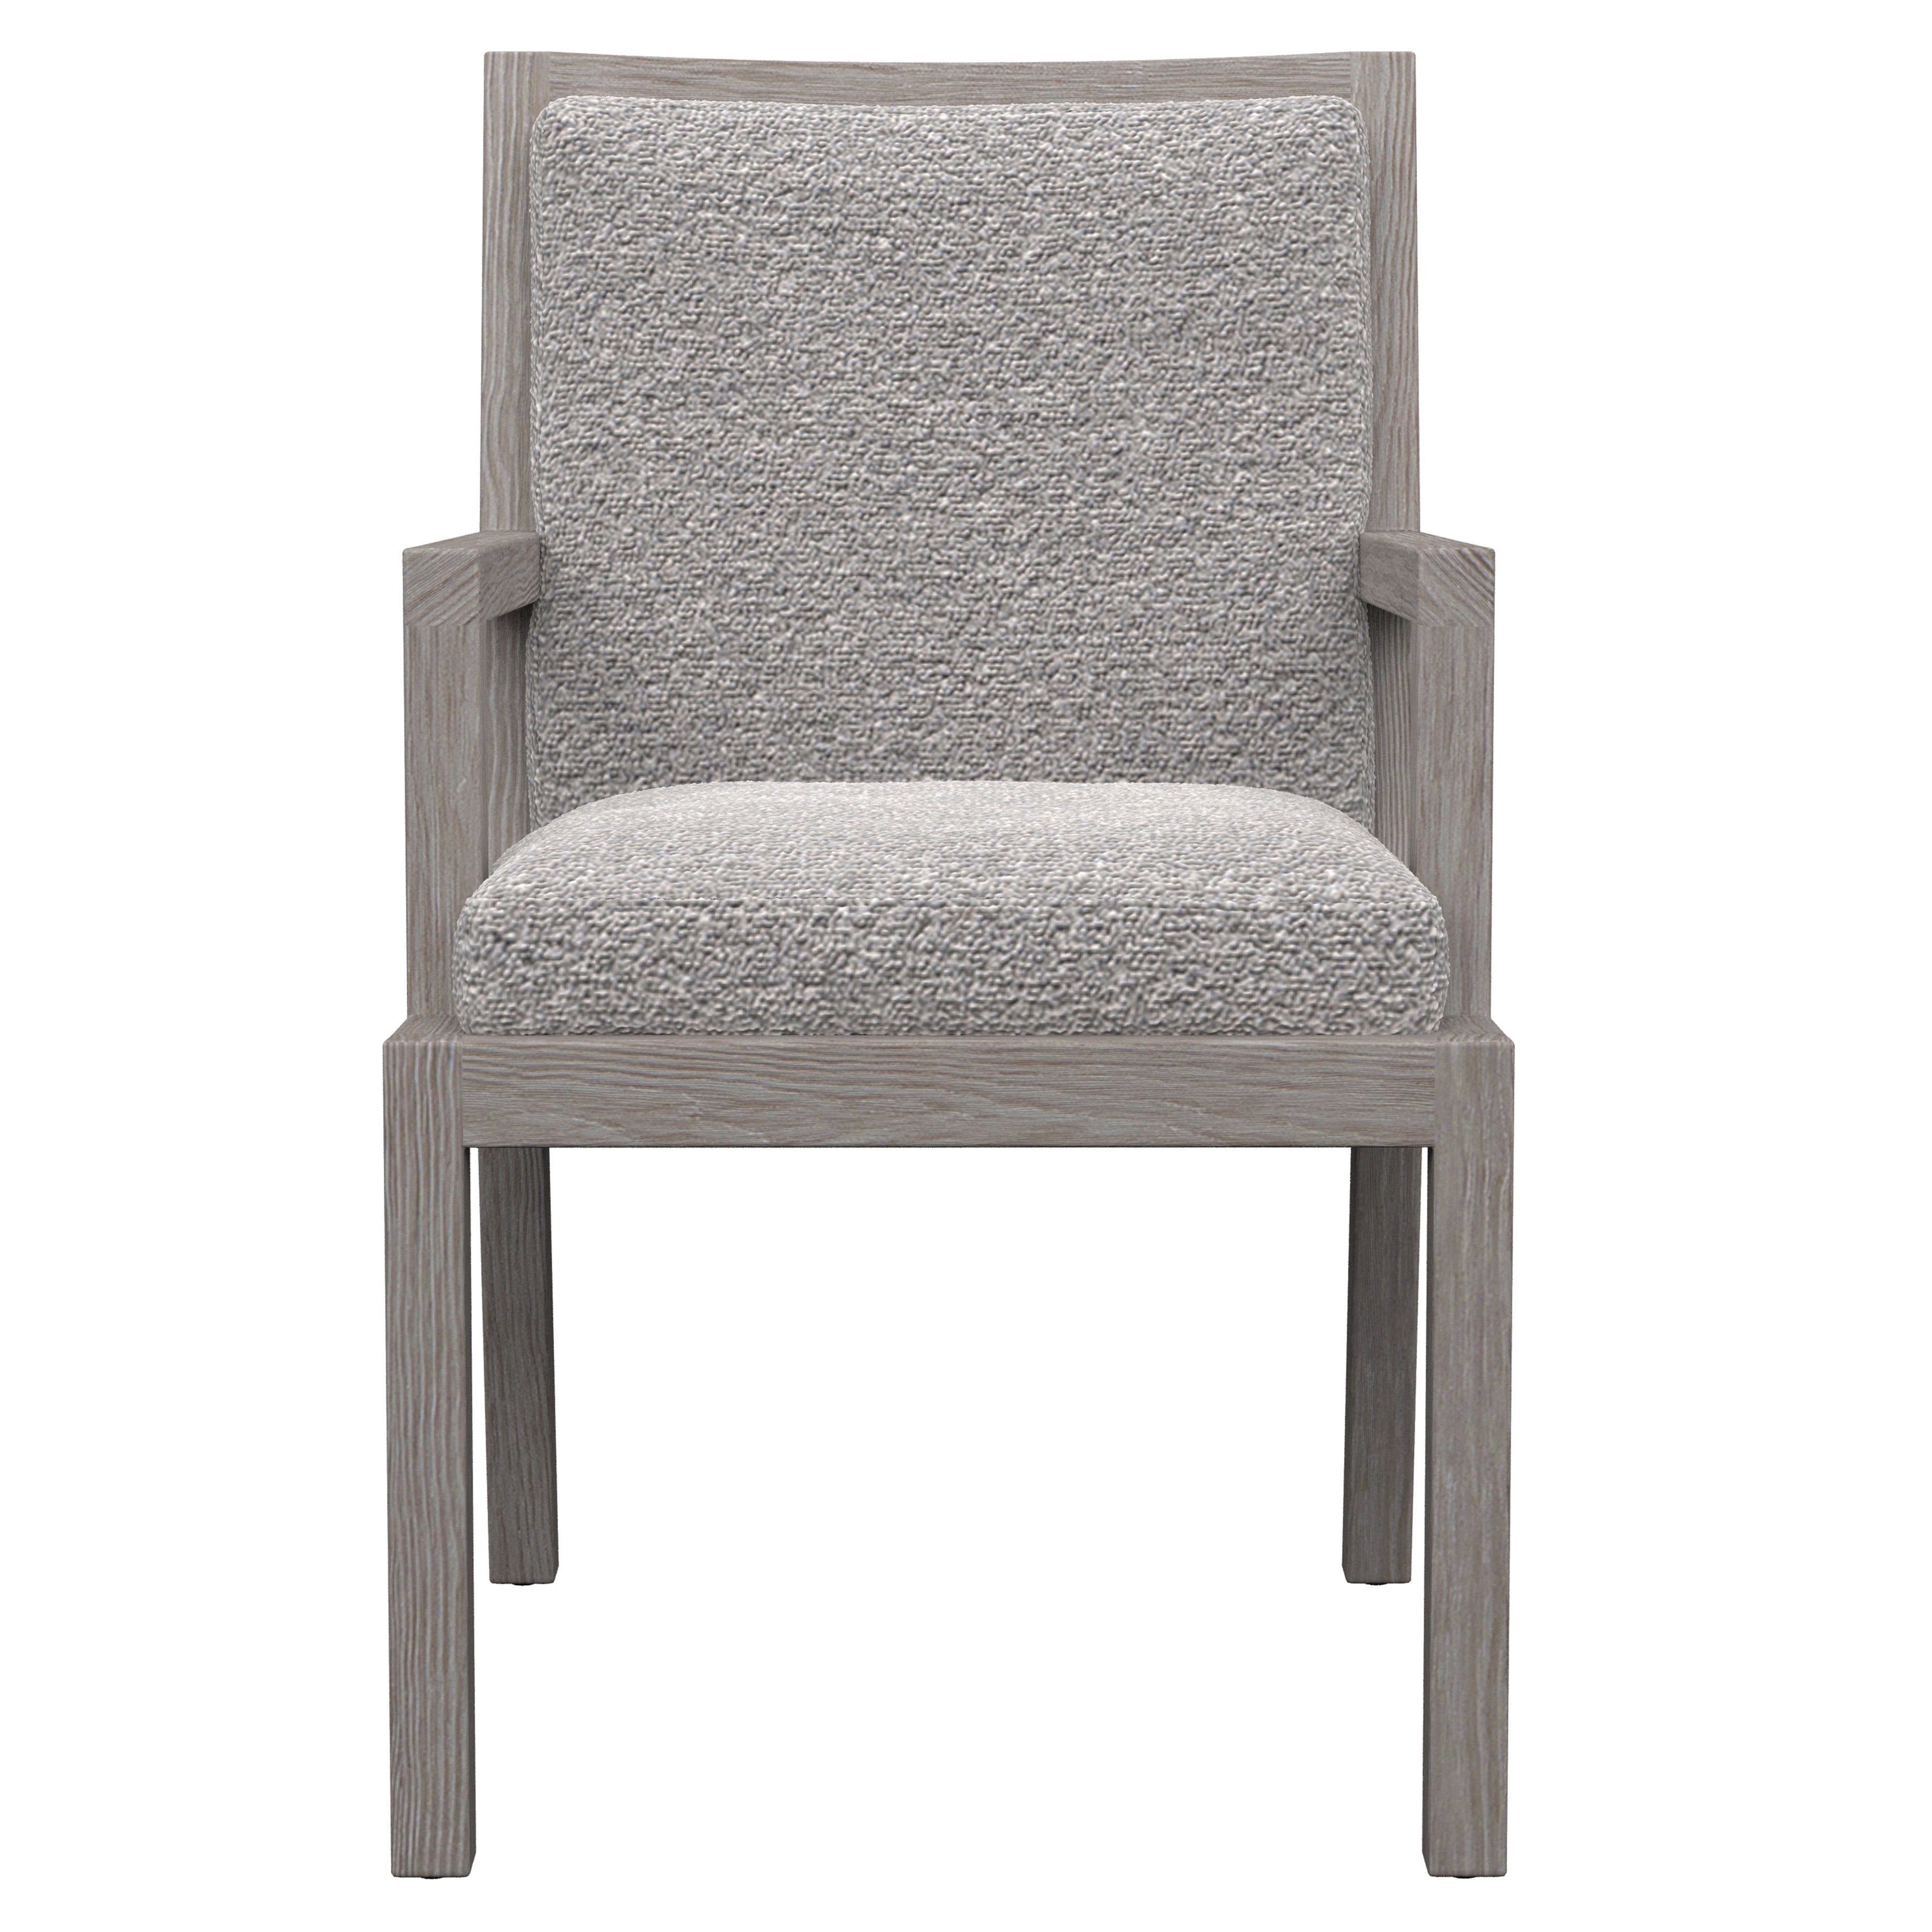 Trianon Ladderback Arm Chair in Gris Finish